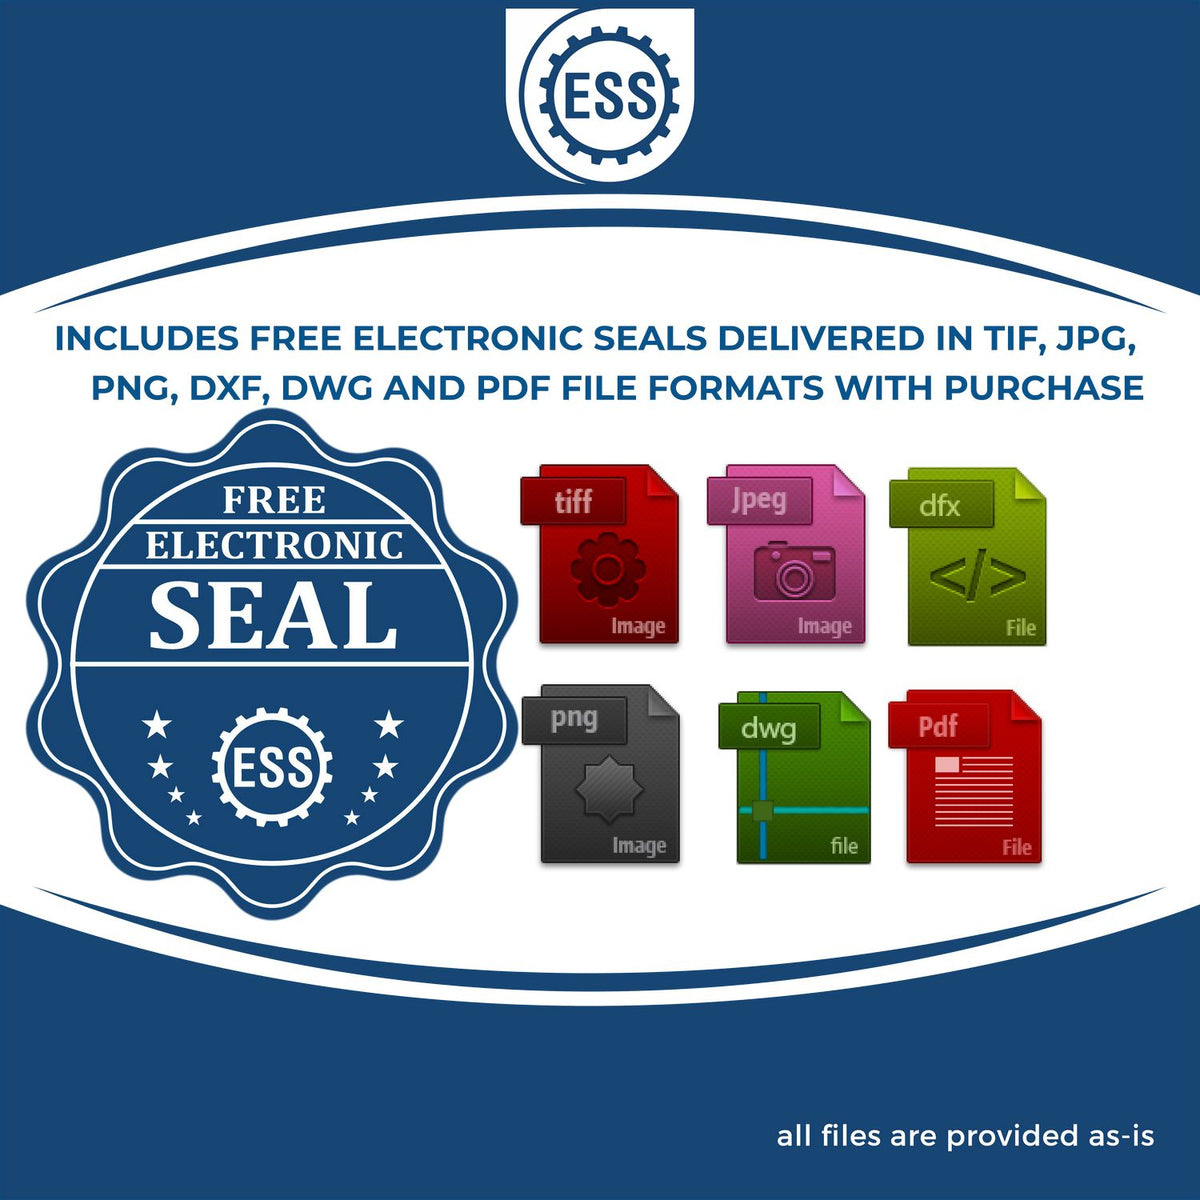 An infographic for the free electronic seal for the Soft Kansas Professional Engineer Seal illustrating the different file type icons such as DXF, DWG, TIF, JPG and PNG.